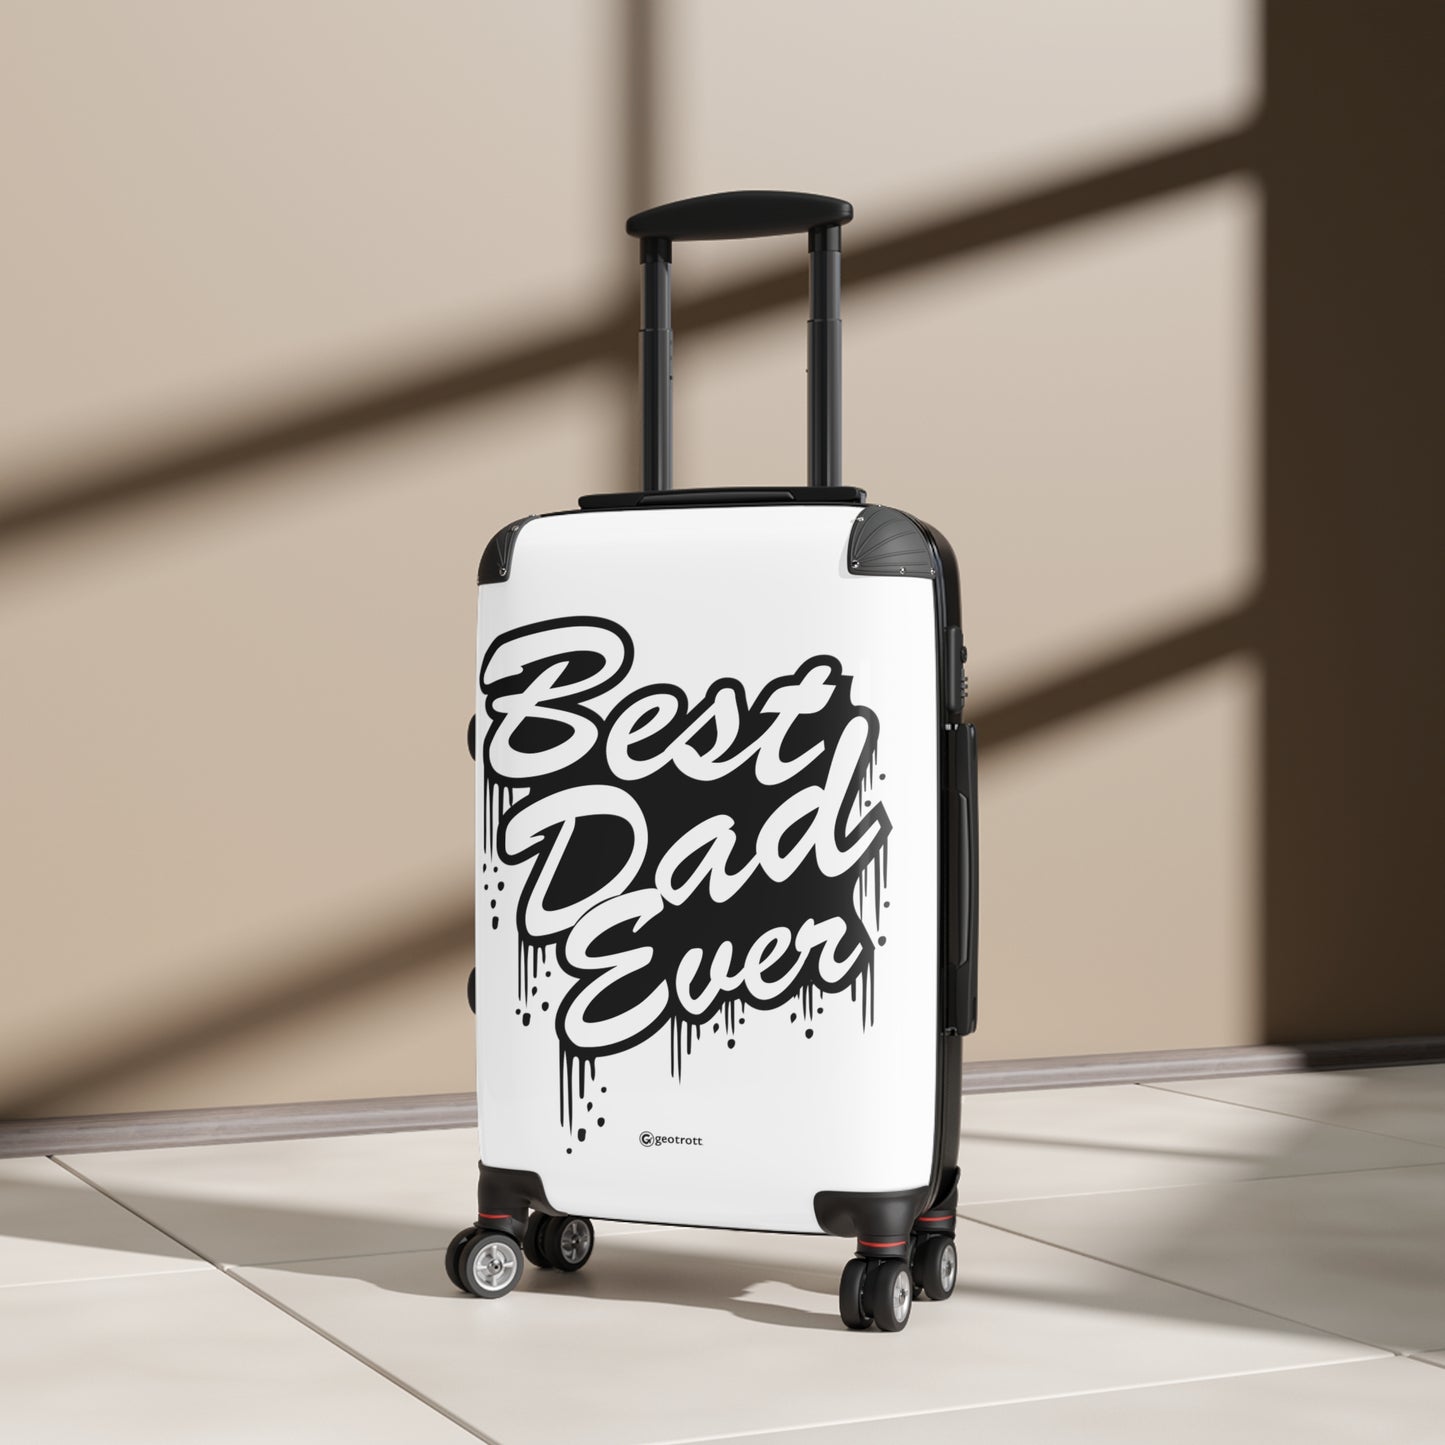 Best Dad Ever White Emotive Inspirational Fathers Day Luggage Bag Rolling Suitcase Travel Accessories